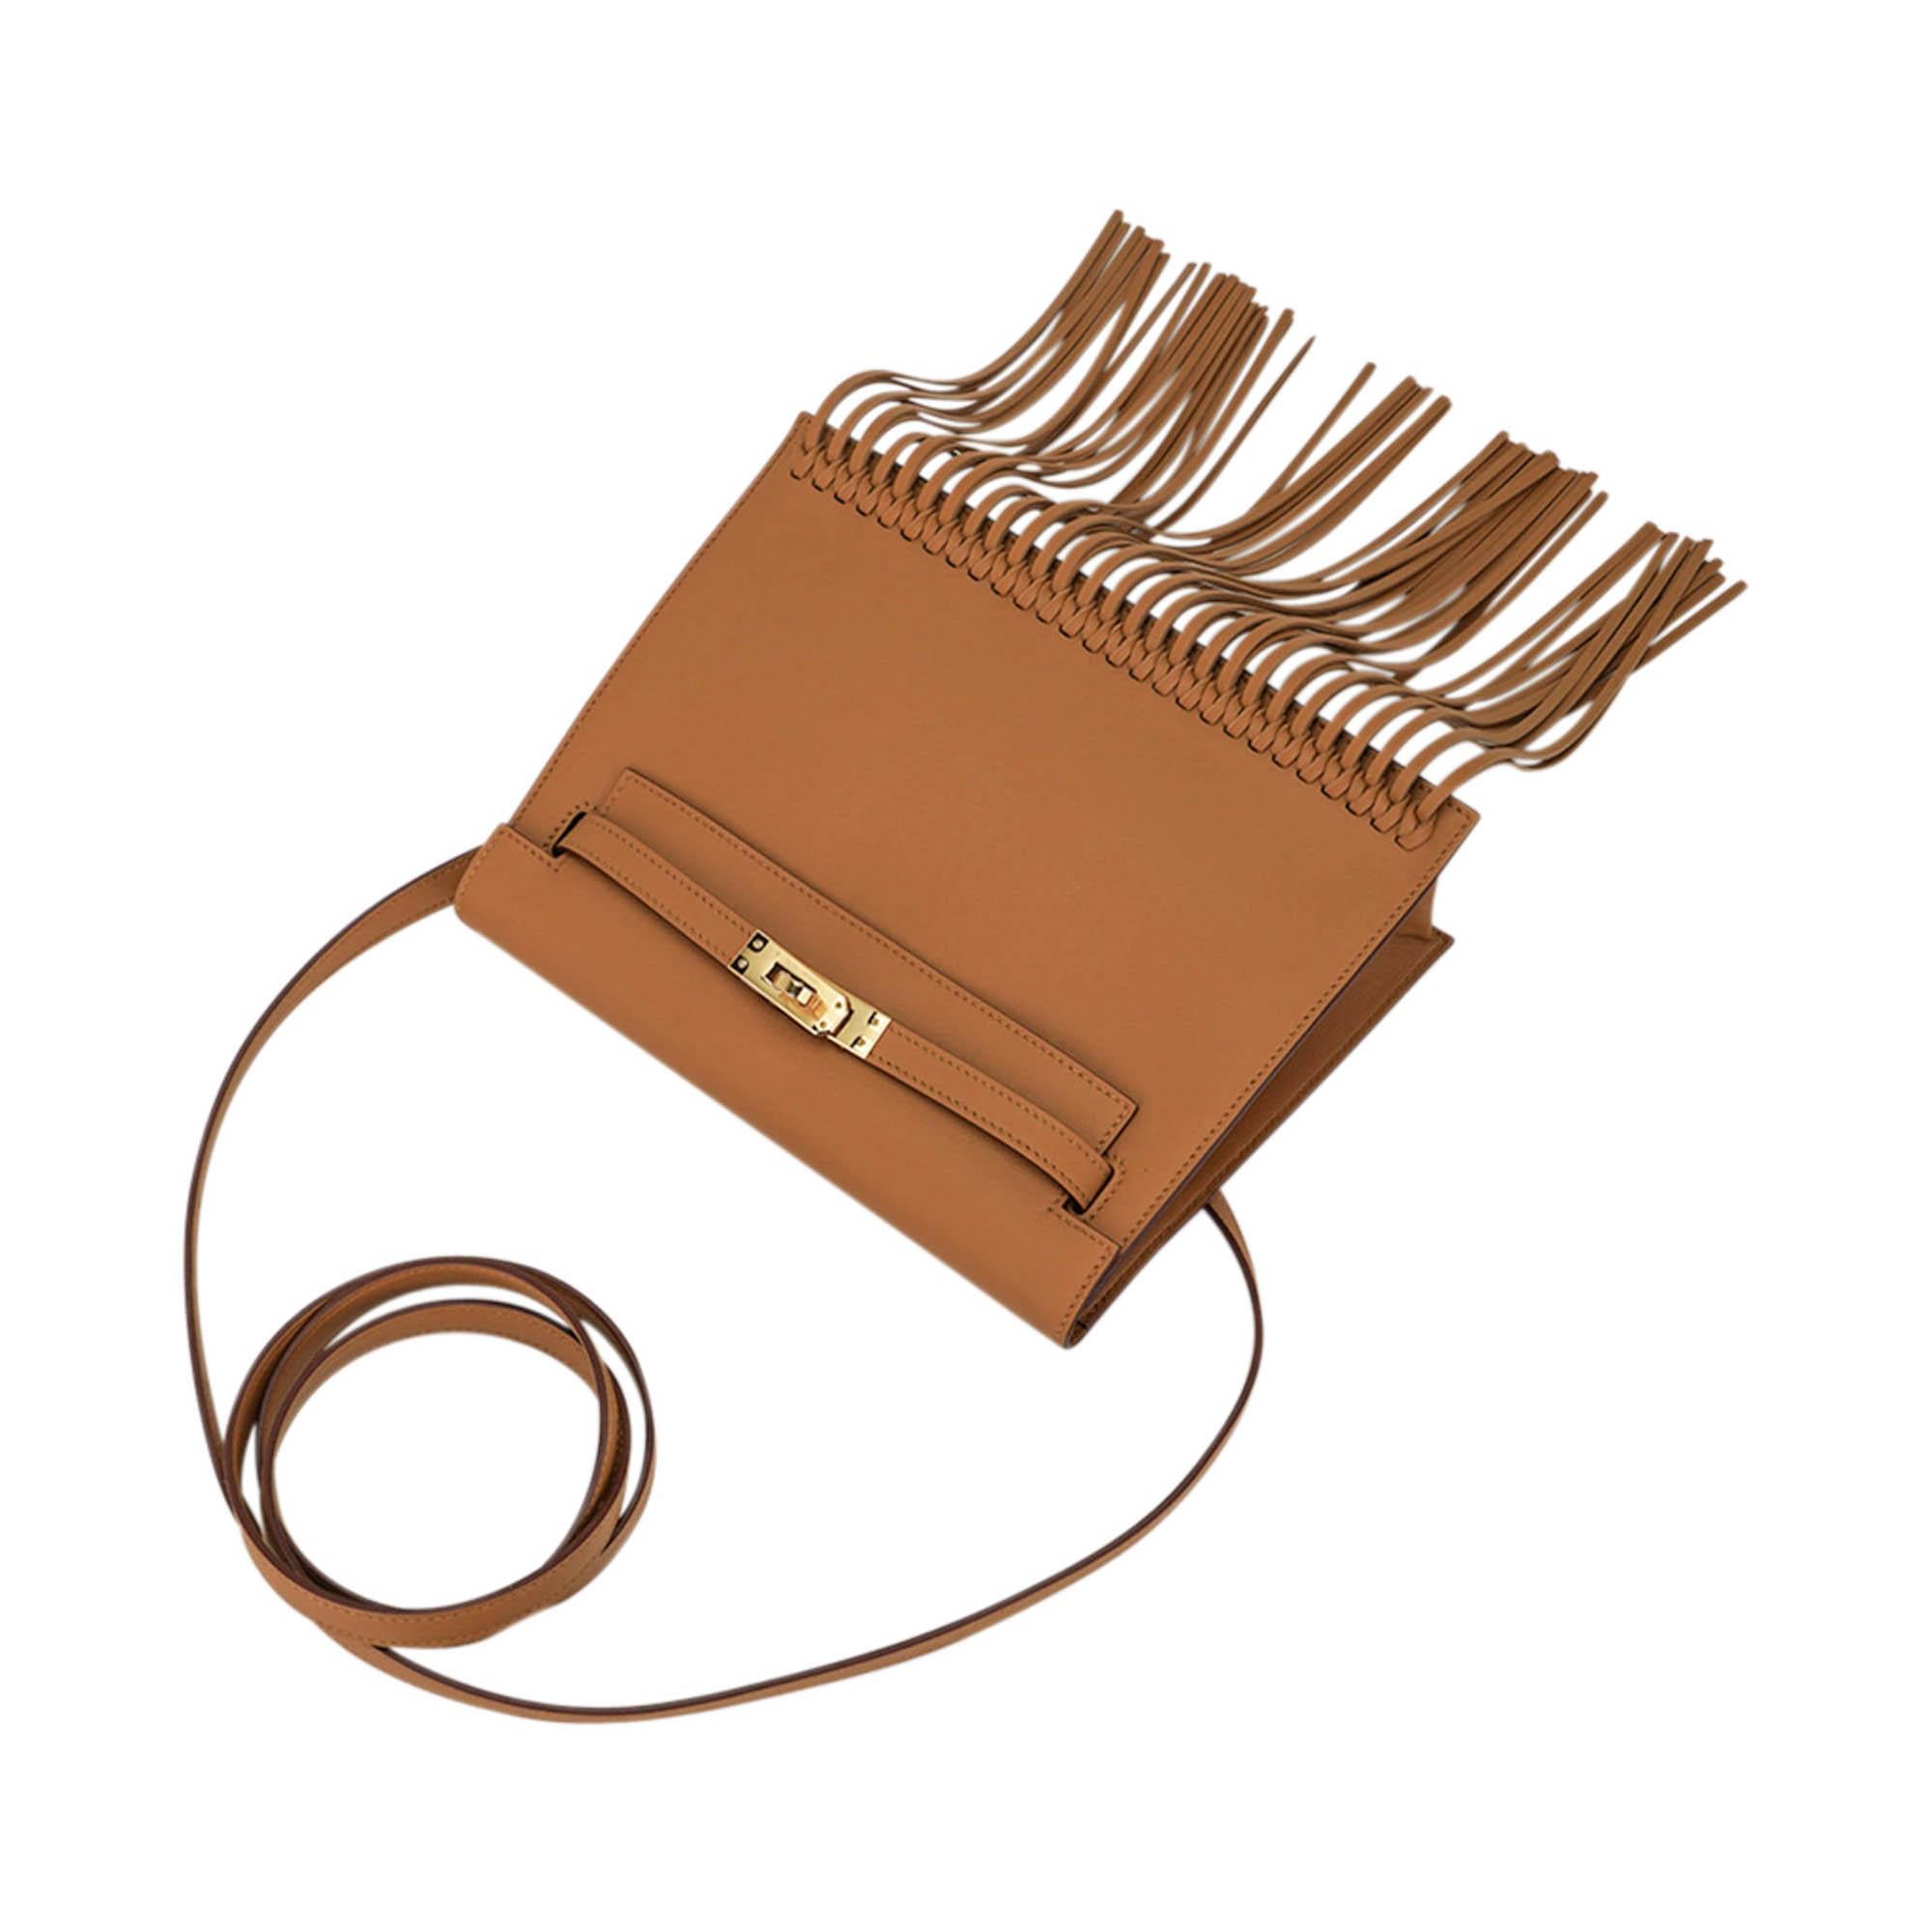 Hermes Kelly Danse Fringe Bag Tabac Sesame with Gold Hardware In New Condition For Sale In Miami, FL